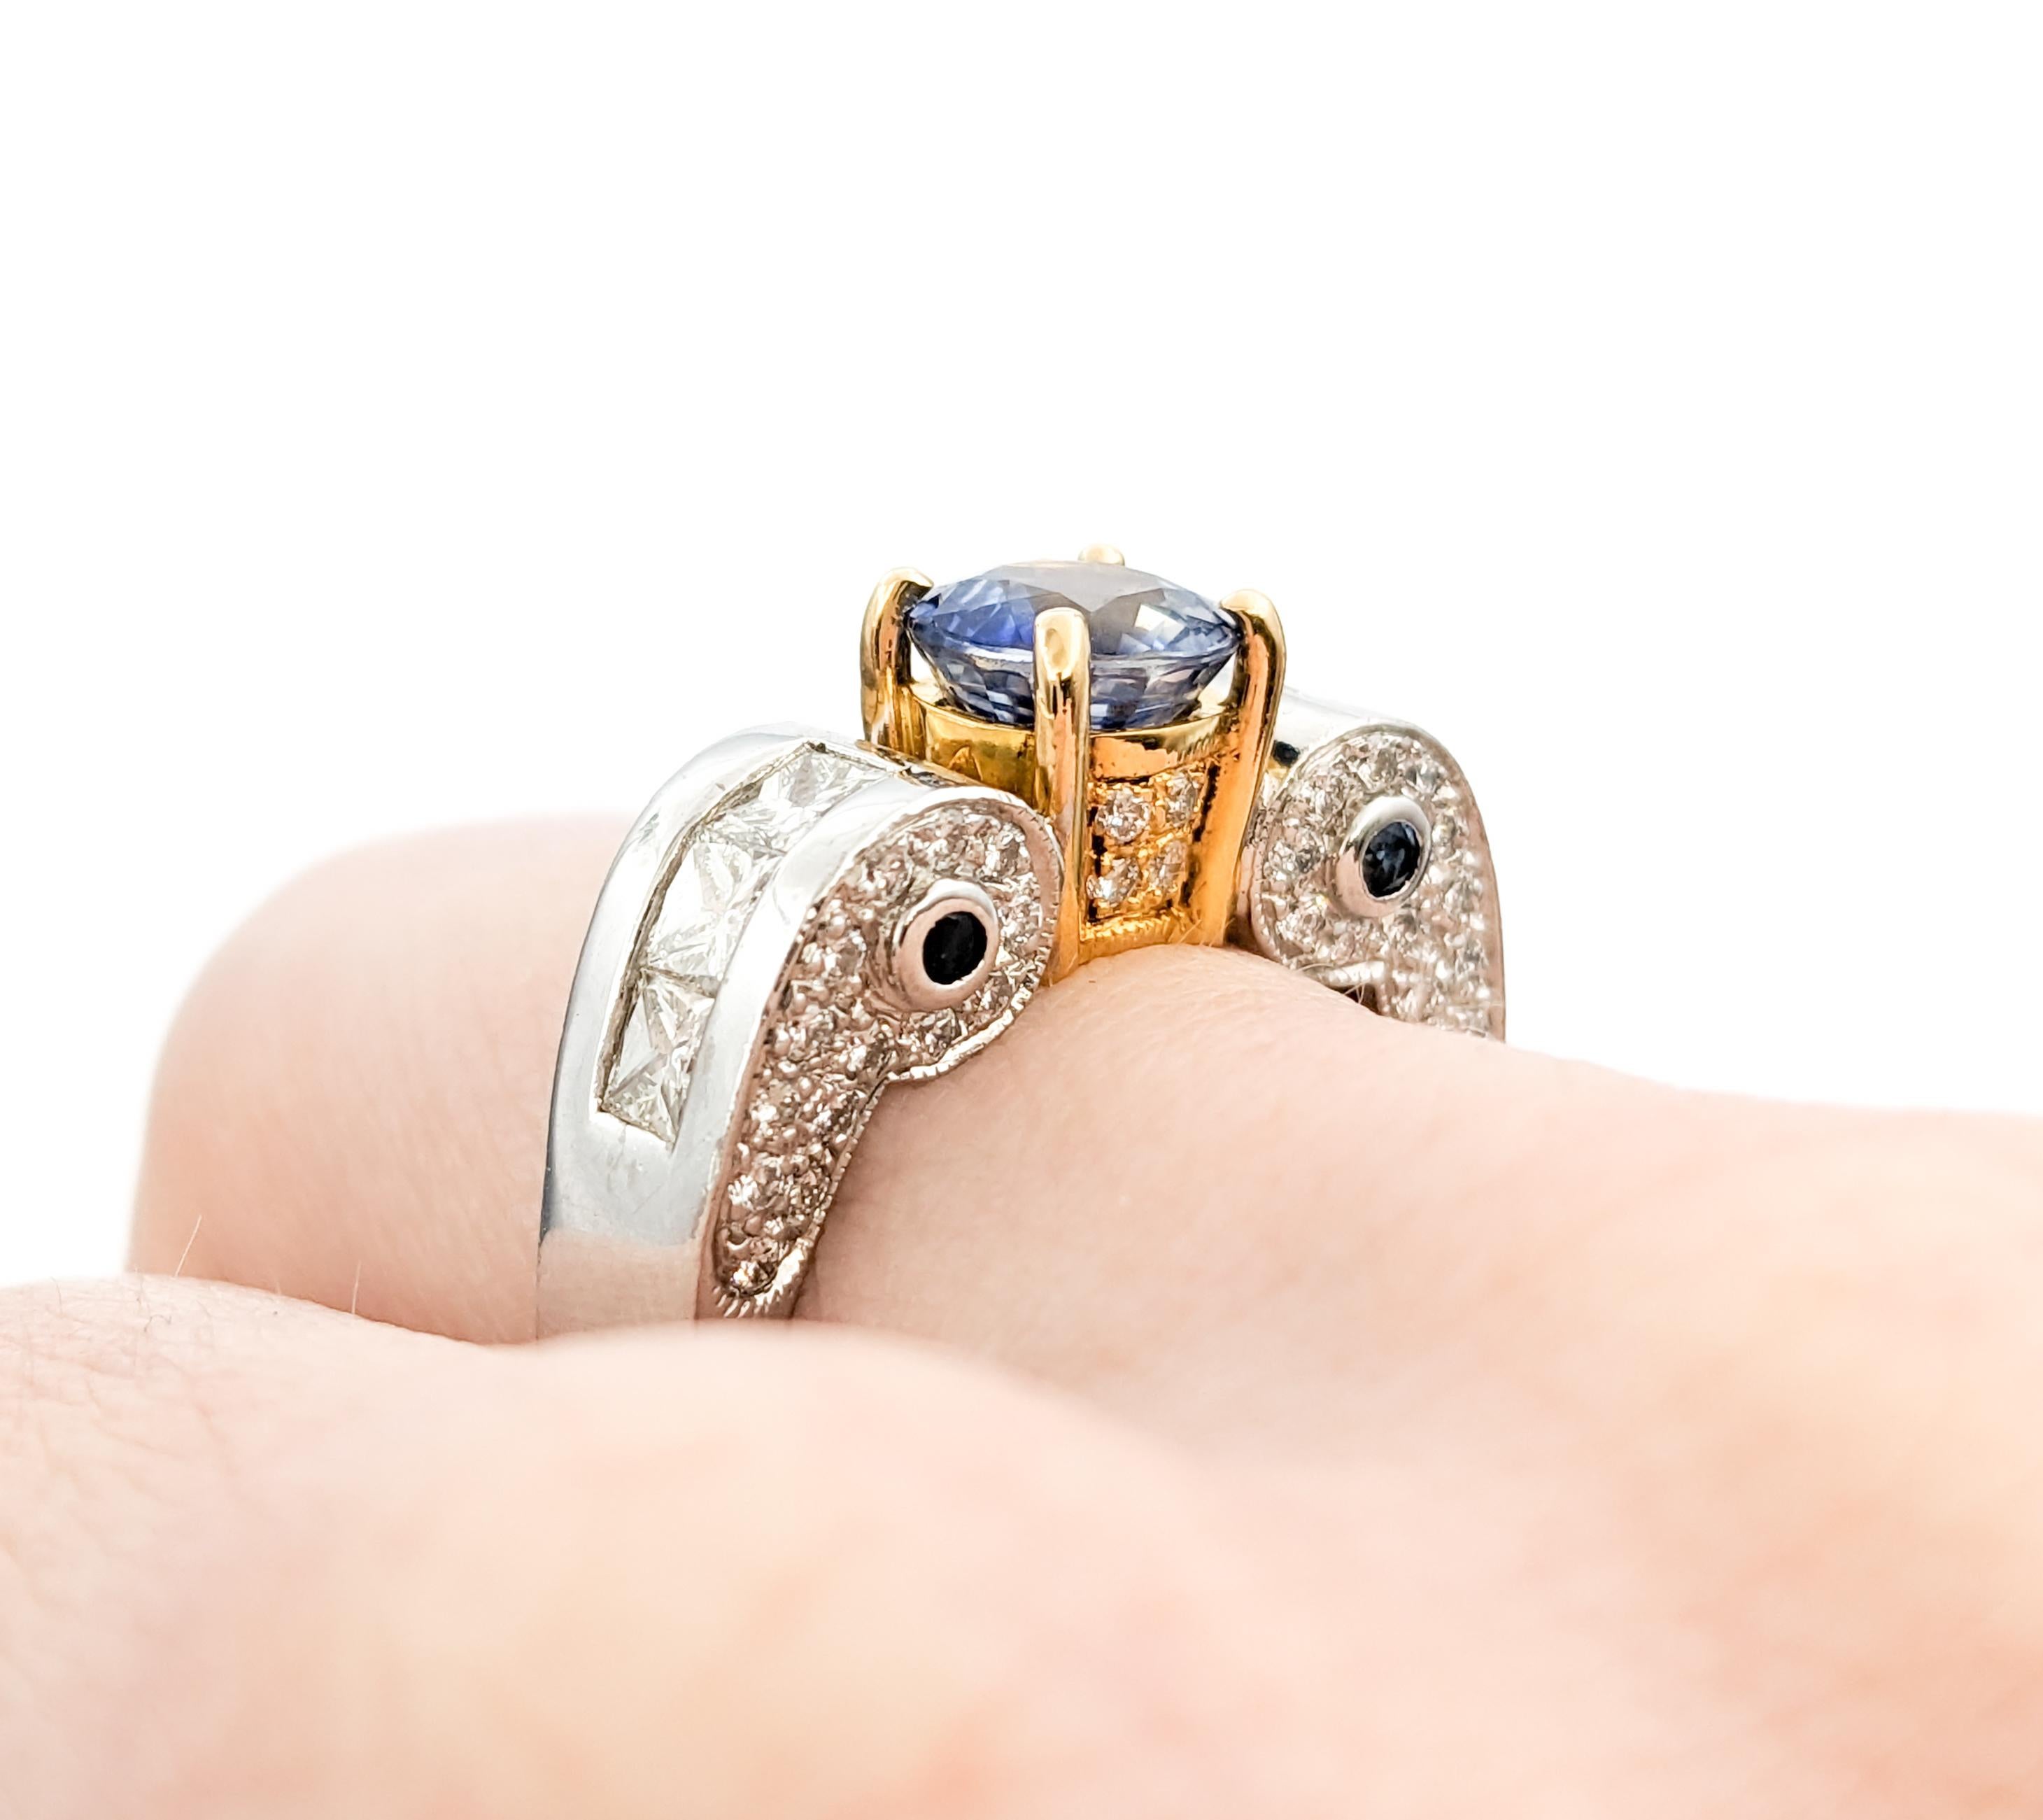 Modern Sapphire & Diamond Ring - 18K Gold In Excellent Condition For Sale In Bloomington, MN